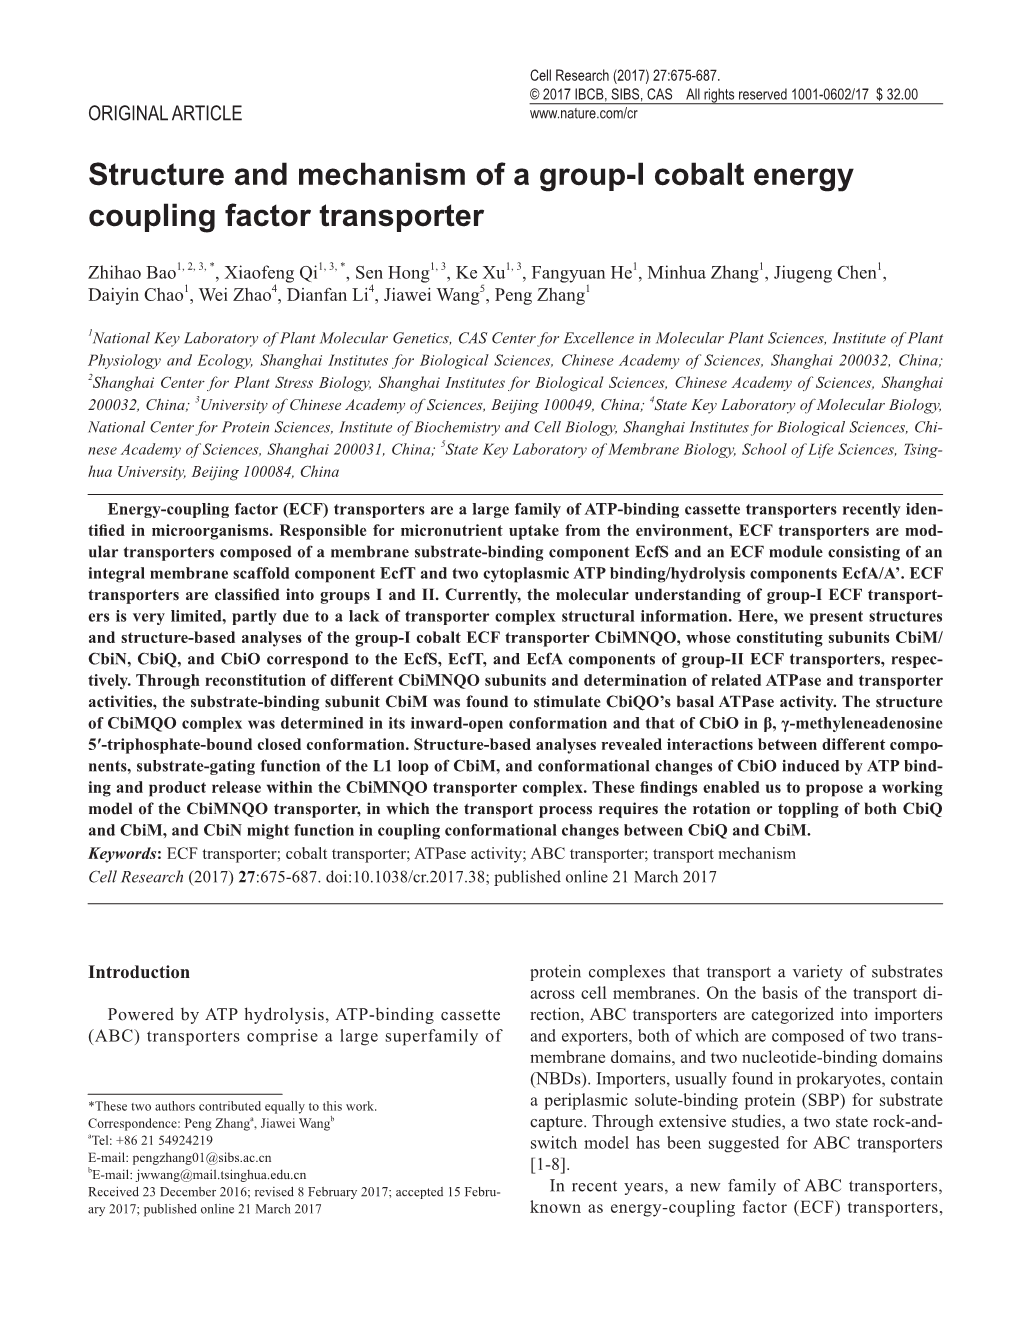 Structure and Mechanism of a Group-I Cobalt Energy Coupling Factor Transporter